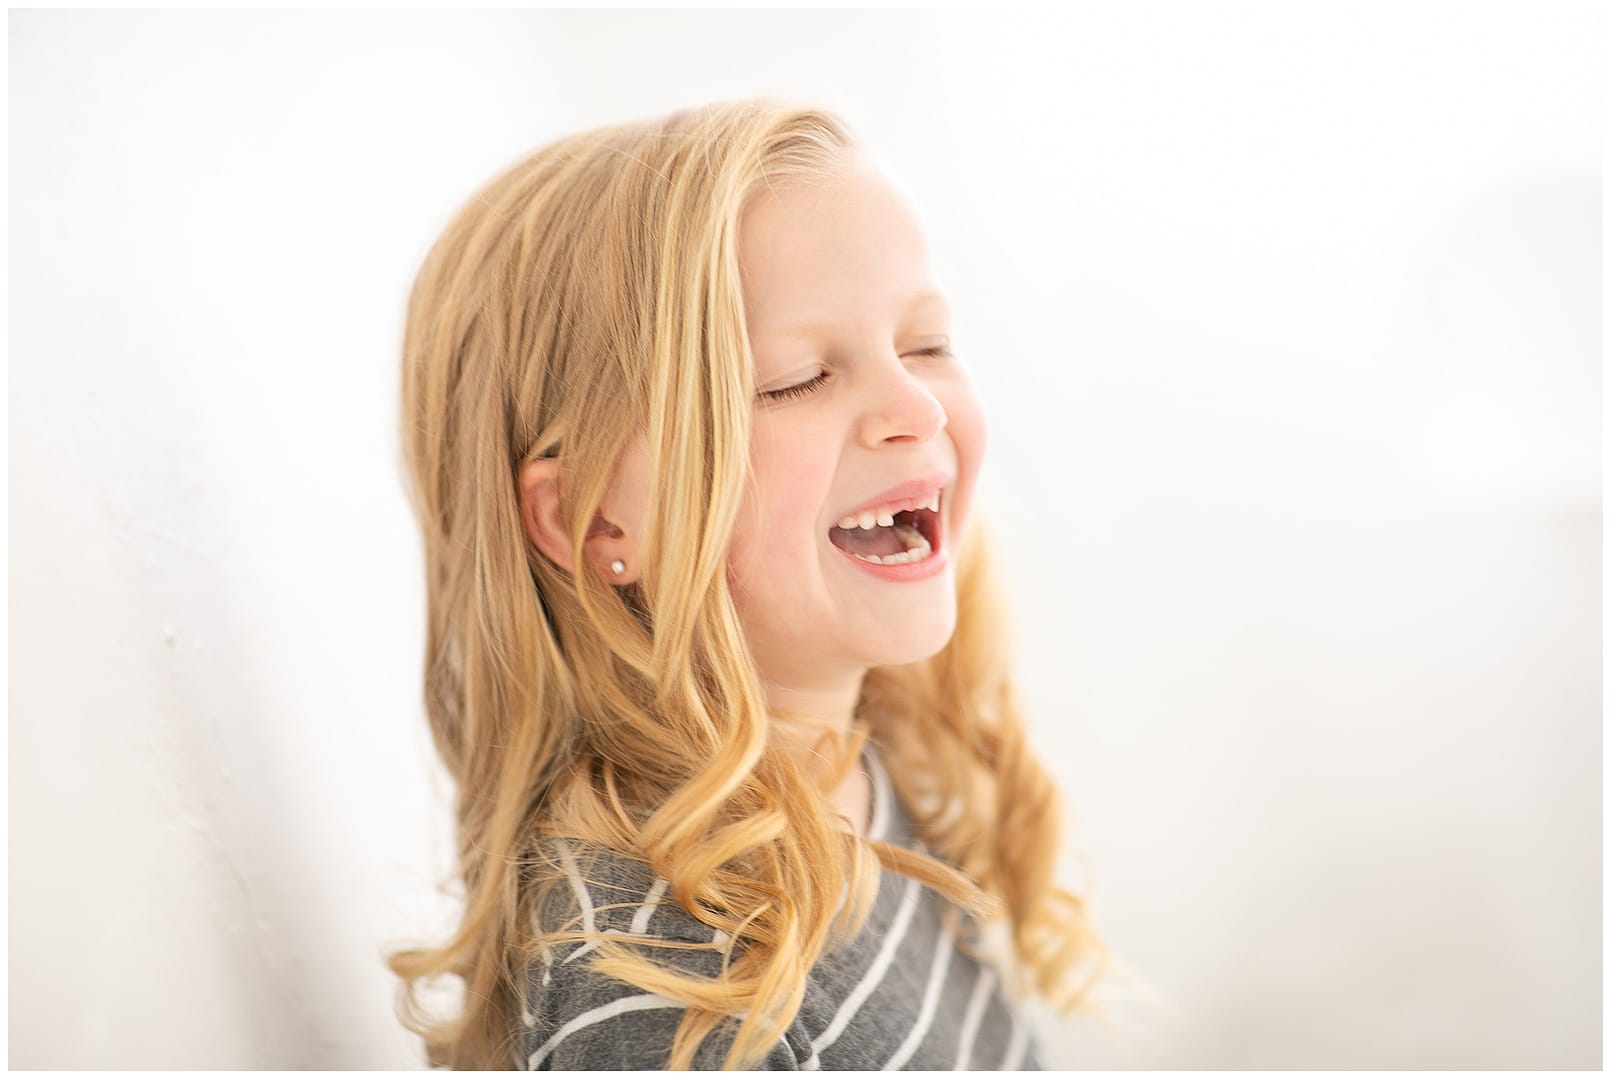 Young girl laughs during photo session. Photos by Tiffany Hix Photography.